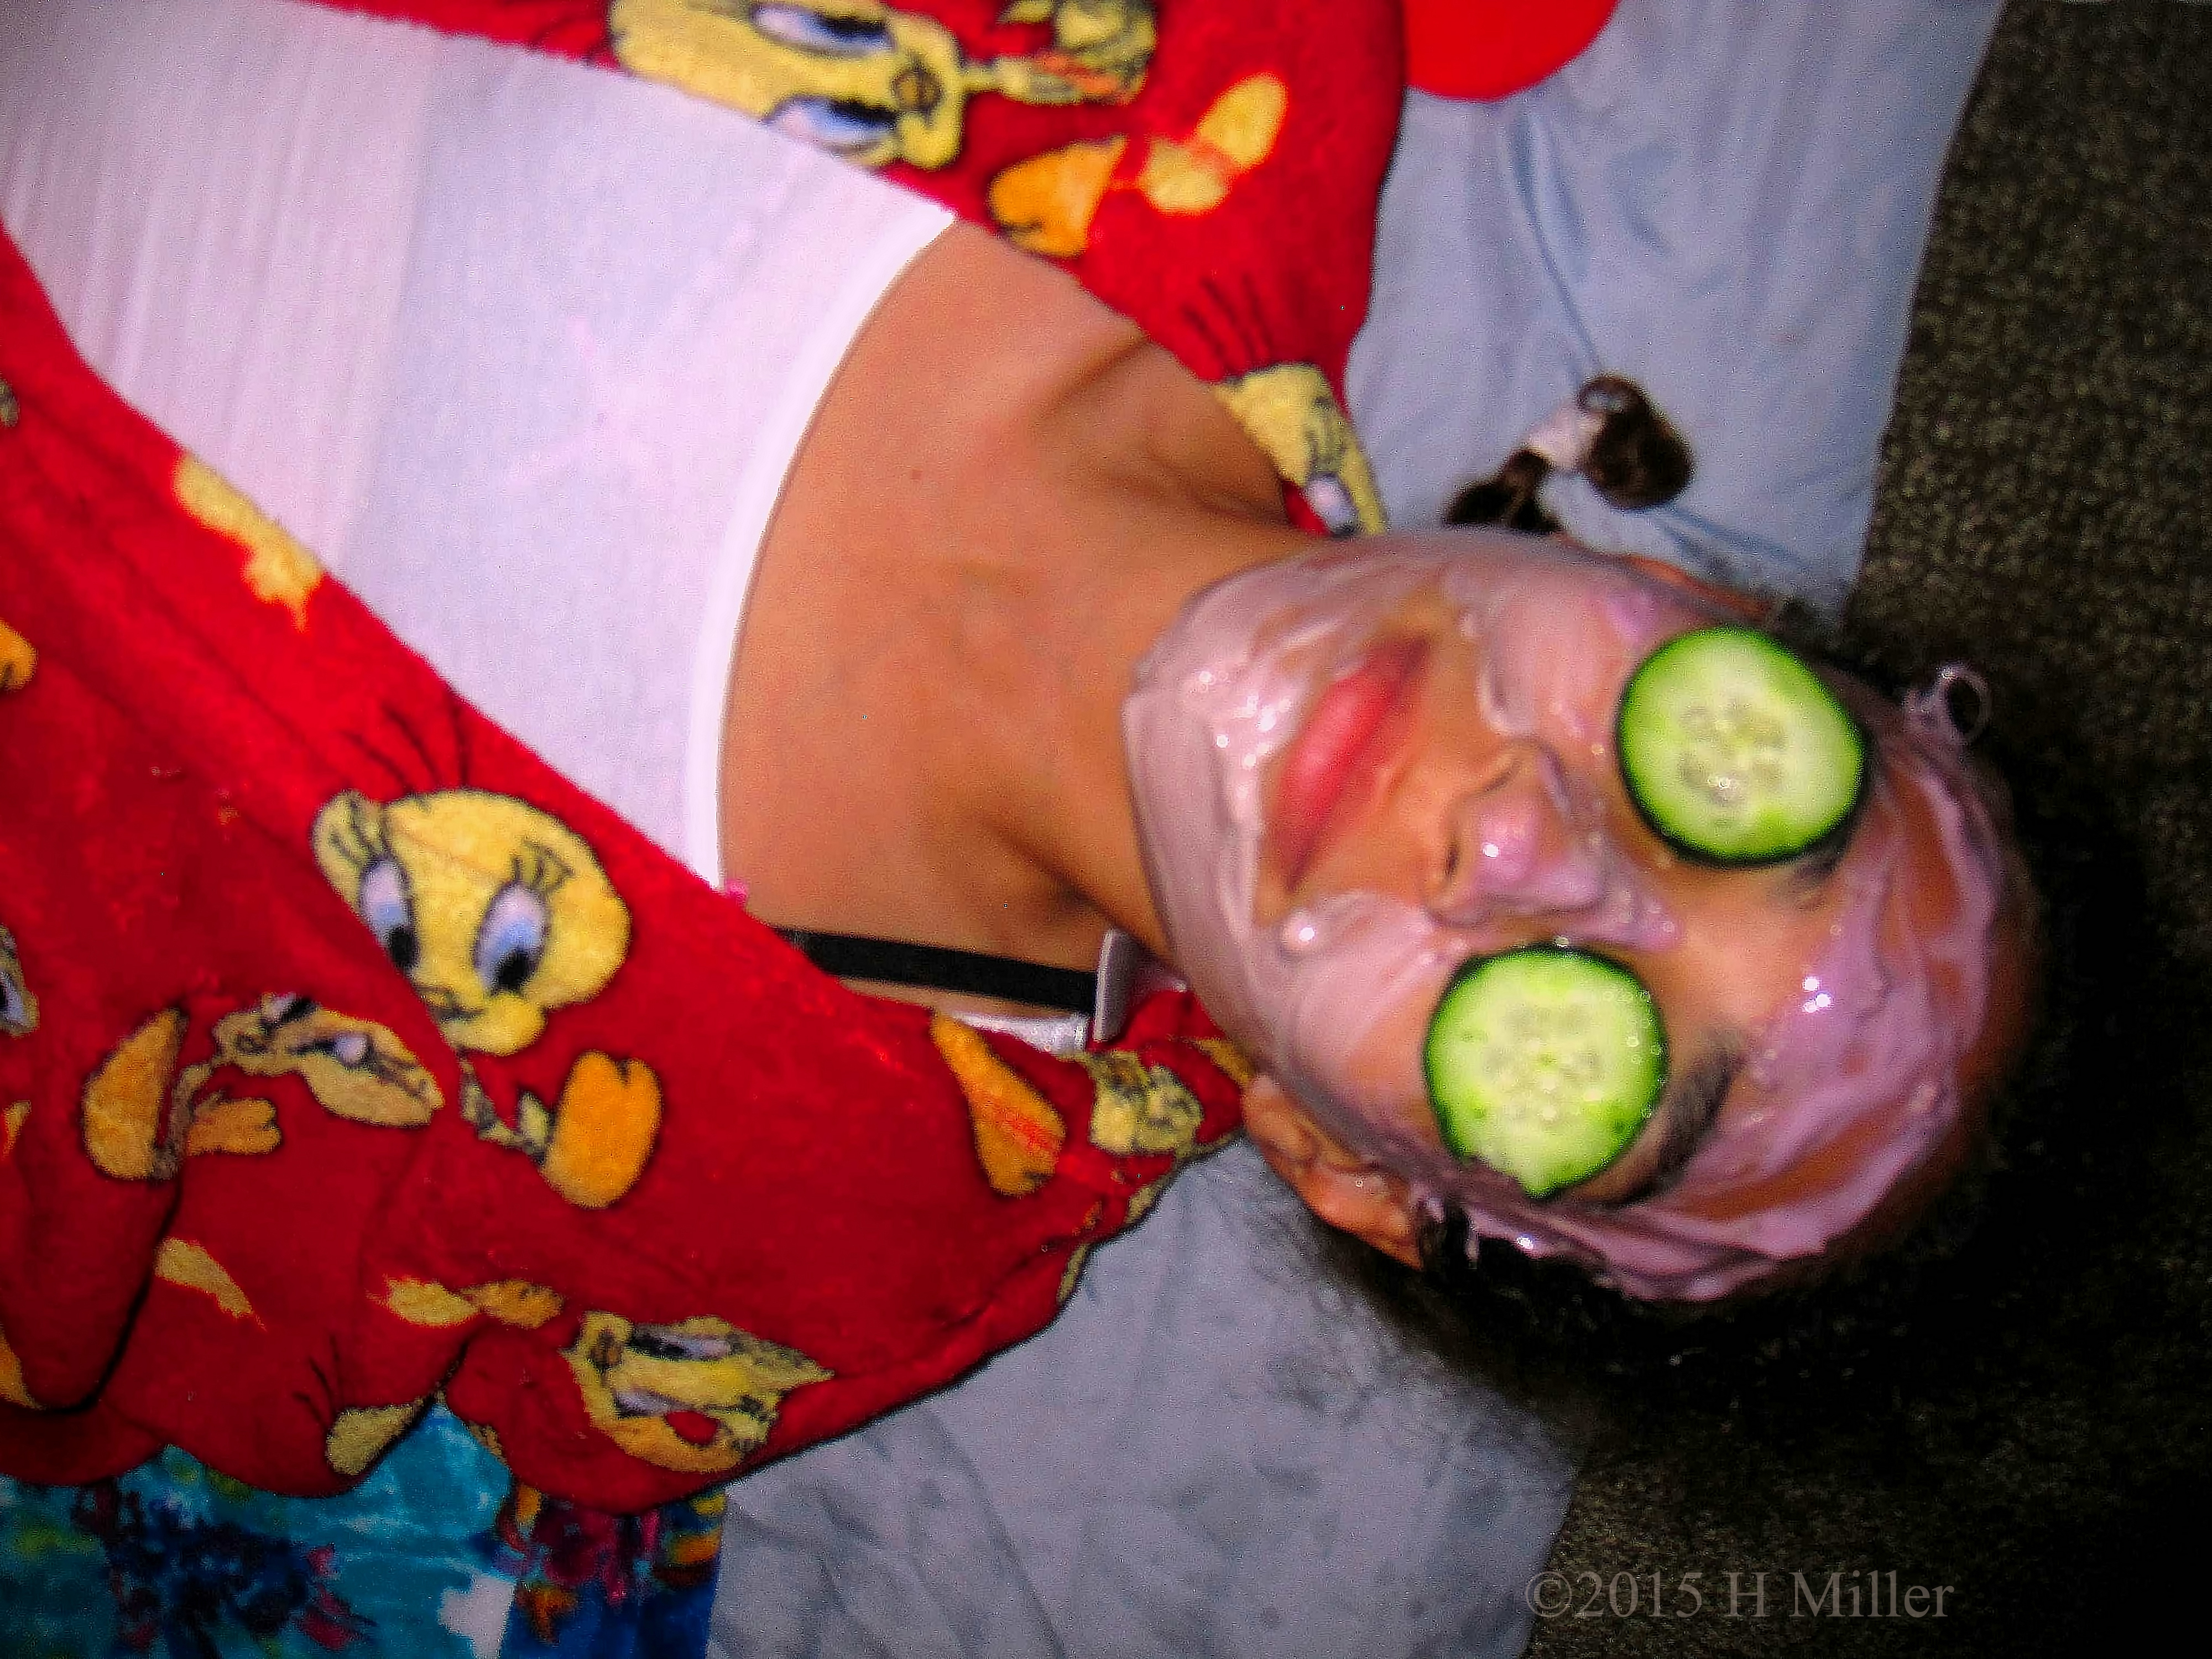 Facial Mask With Blueberry And Green Clay Yogurt, And Chocolate Split Flavors!